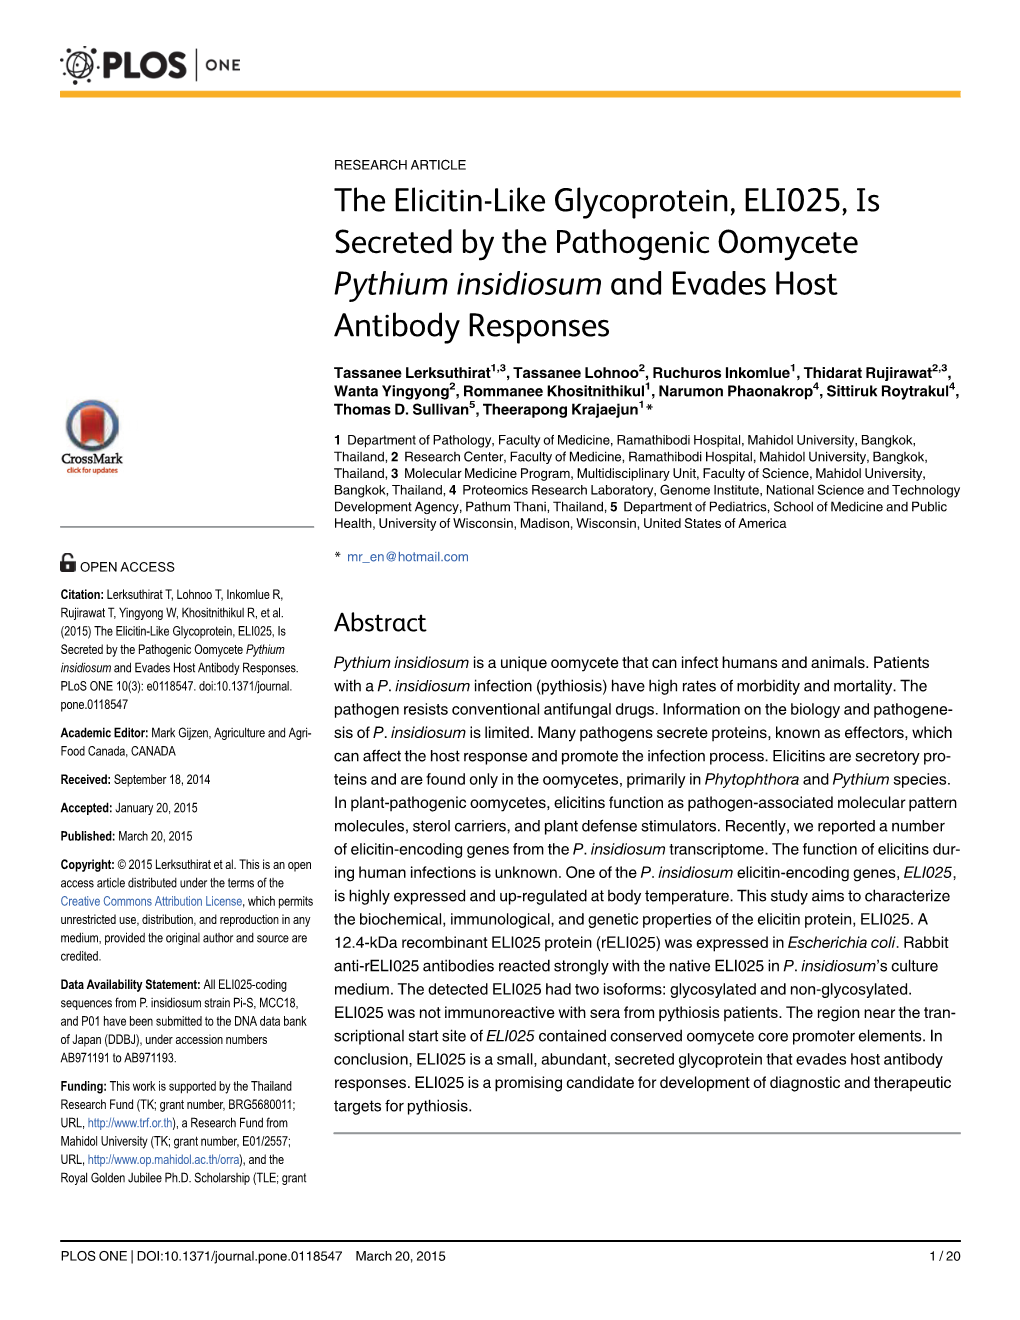 The Elicitin-Like Glycoprotein, ELI025, Is Secreted by the Pathogenic Oomycete Pythium Insidiosum and Evades Host Antibody Responses